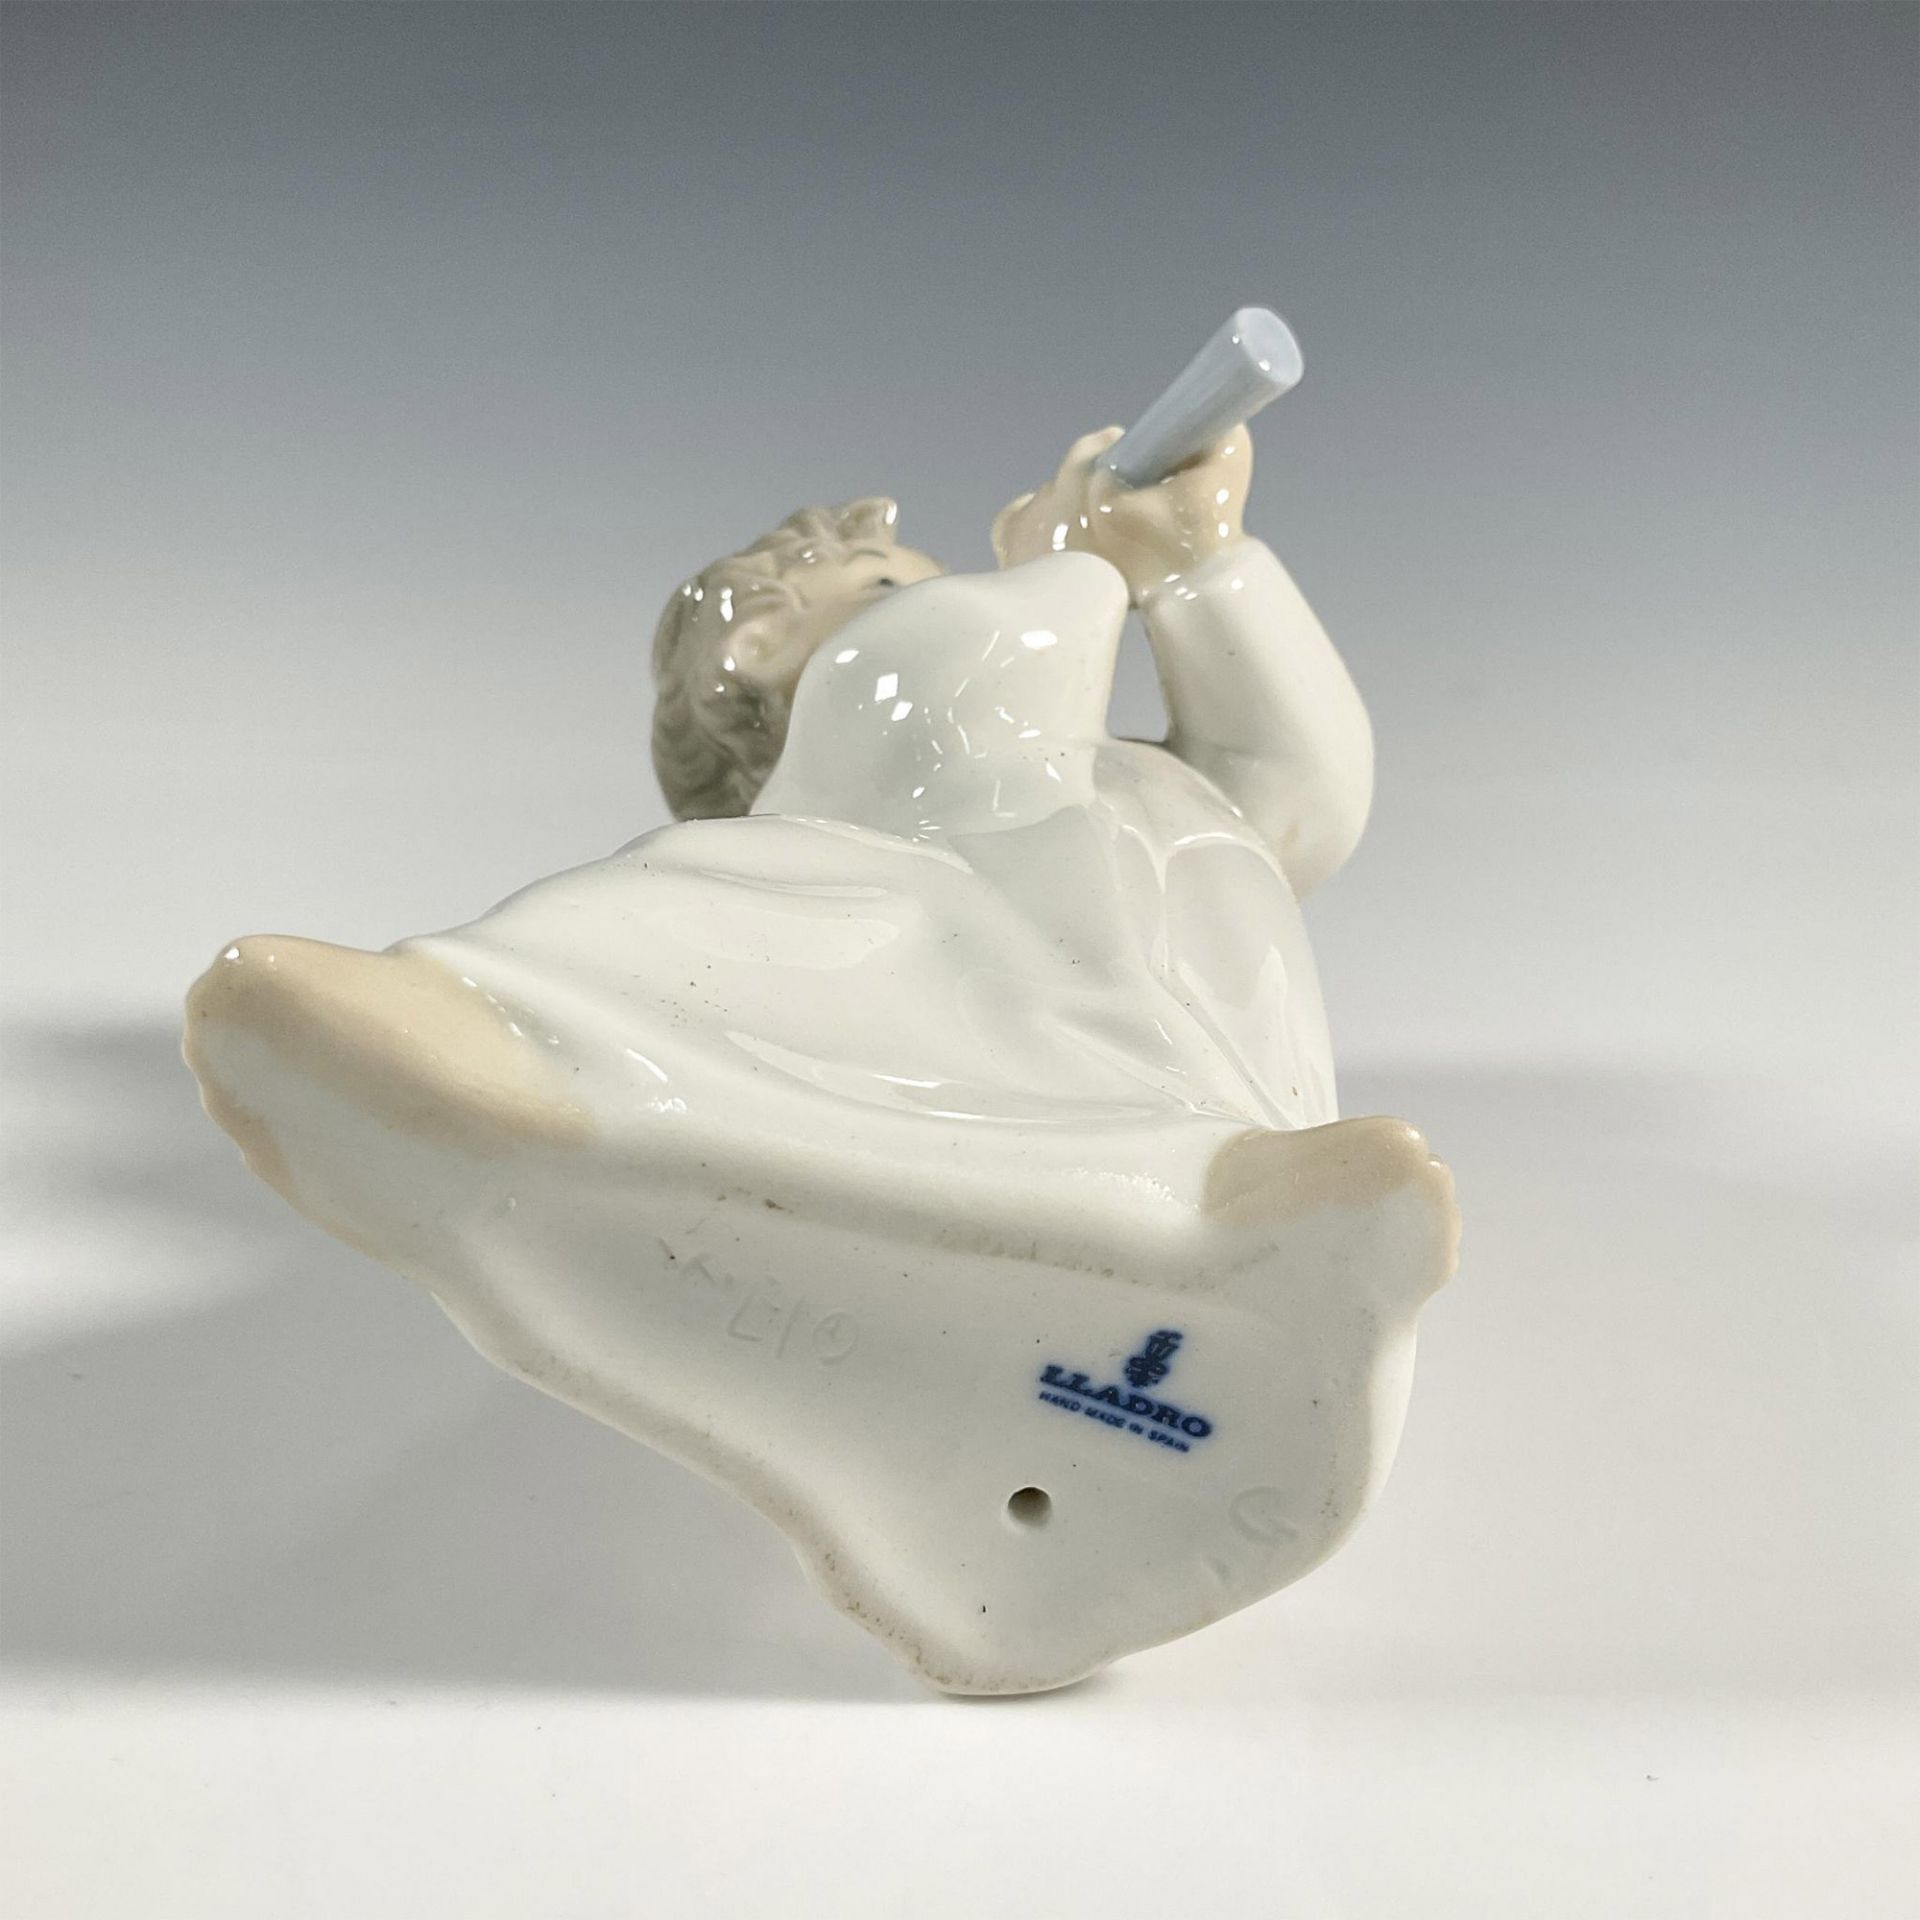 Angel with Flute 1004540 - Lladro Porcelain Figurine - Image 3 of 4